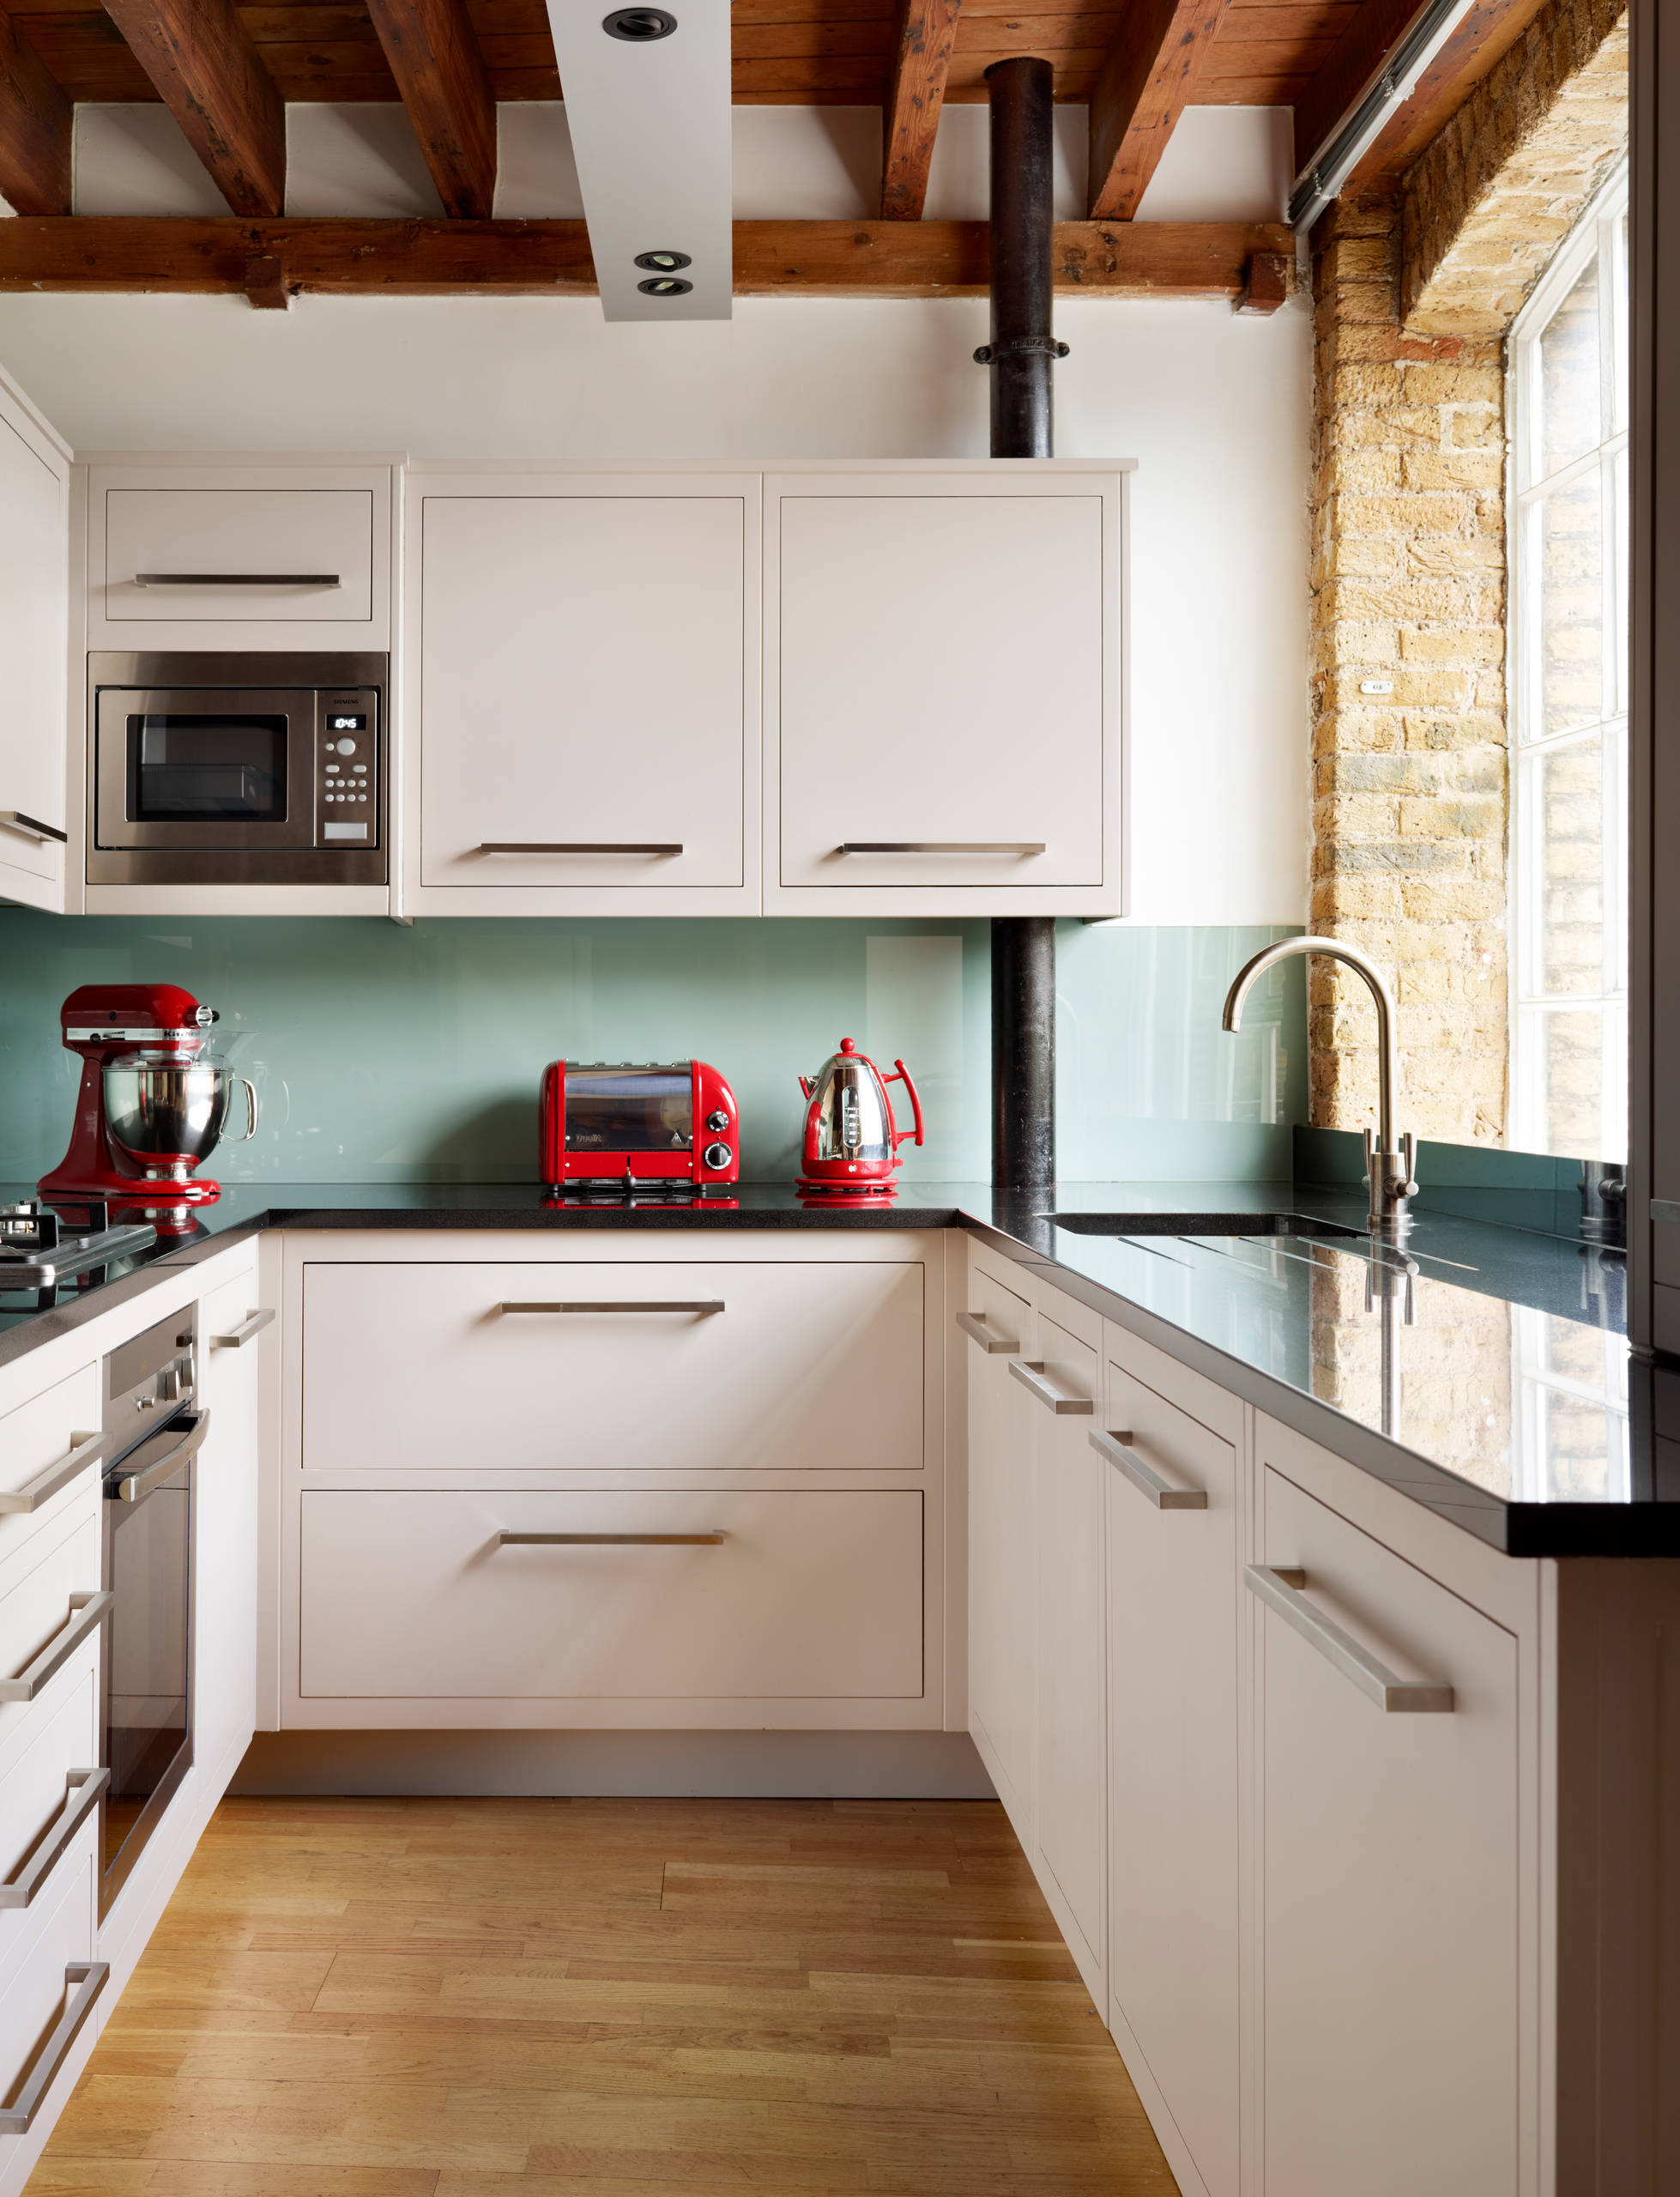 The Best Ideas for Kitchen Extractor Styles from Our Tours